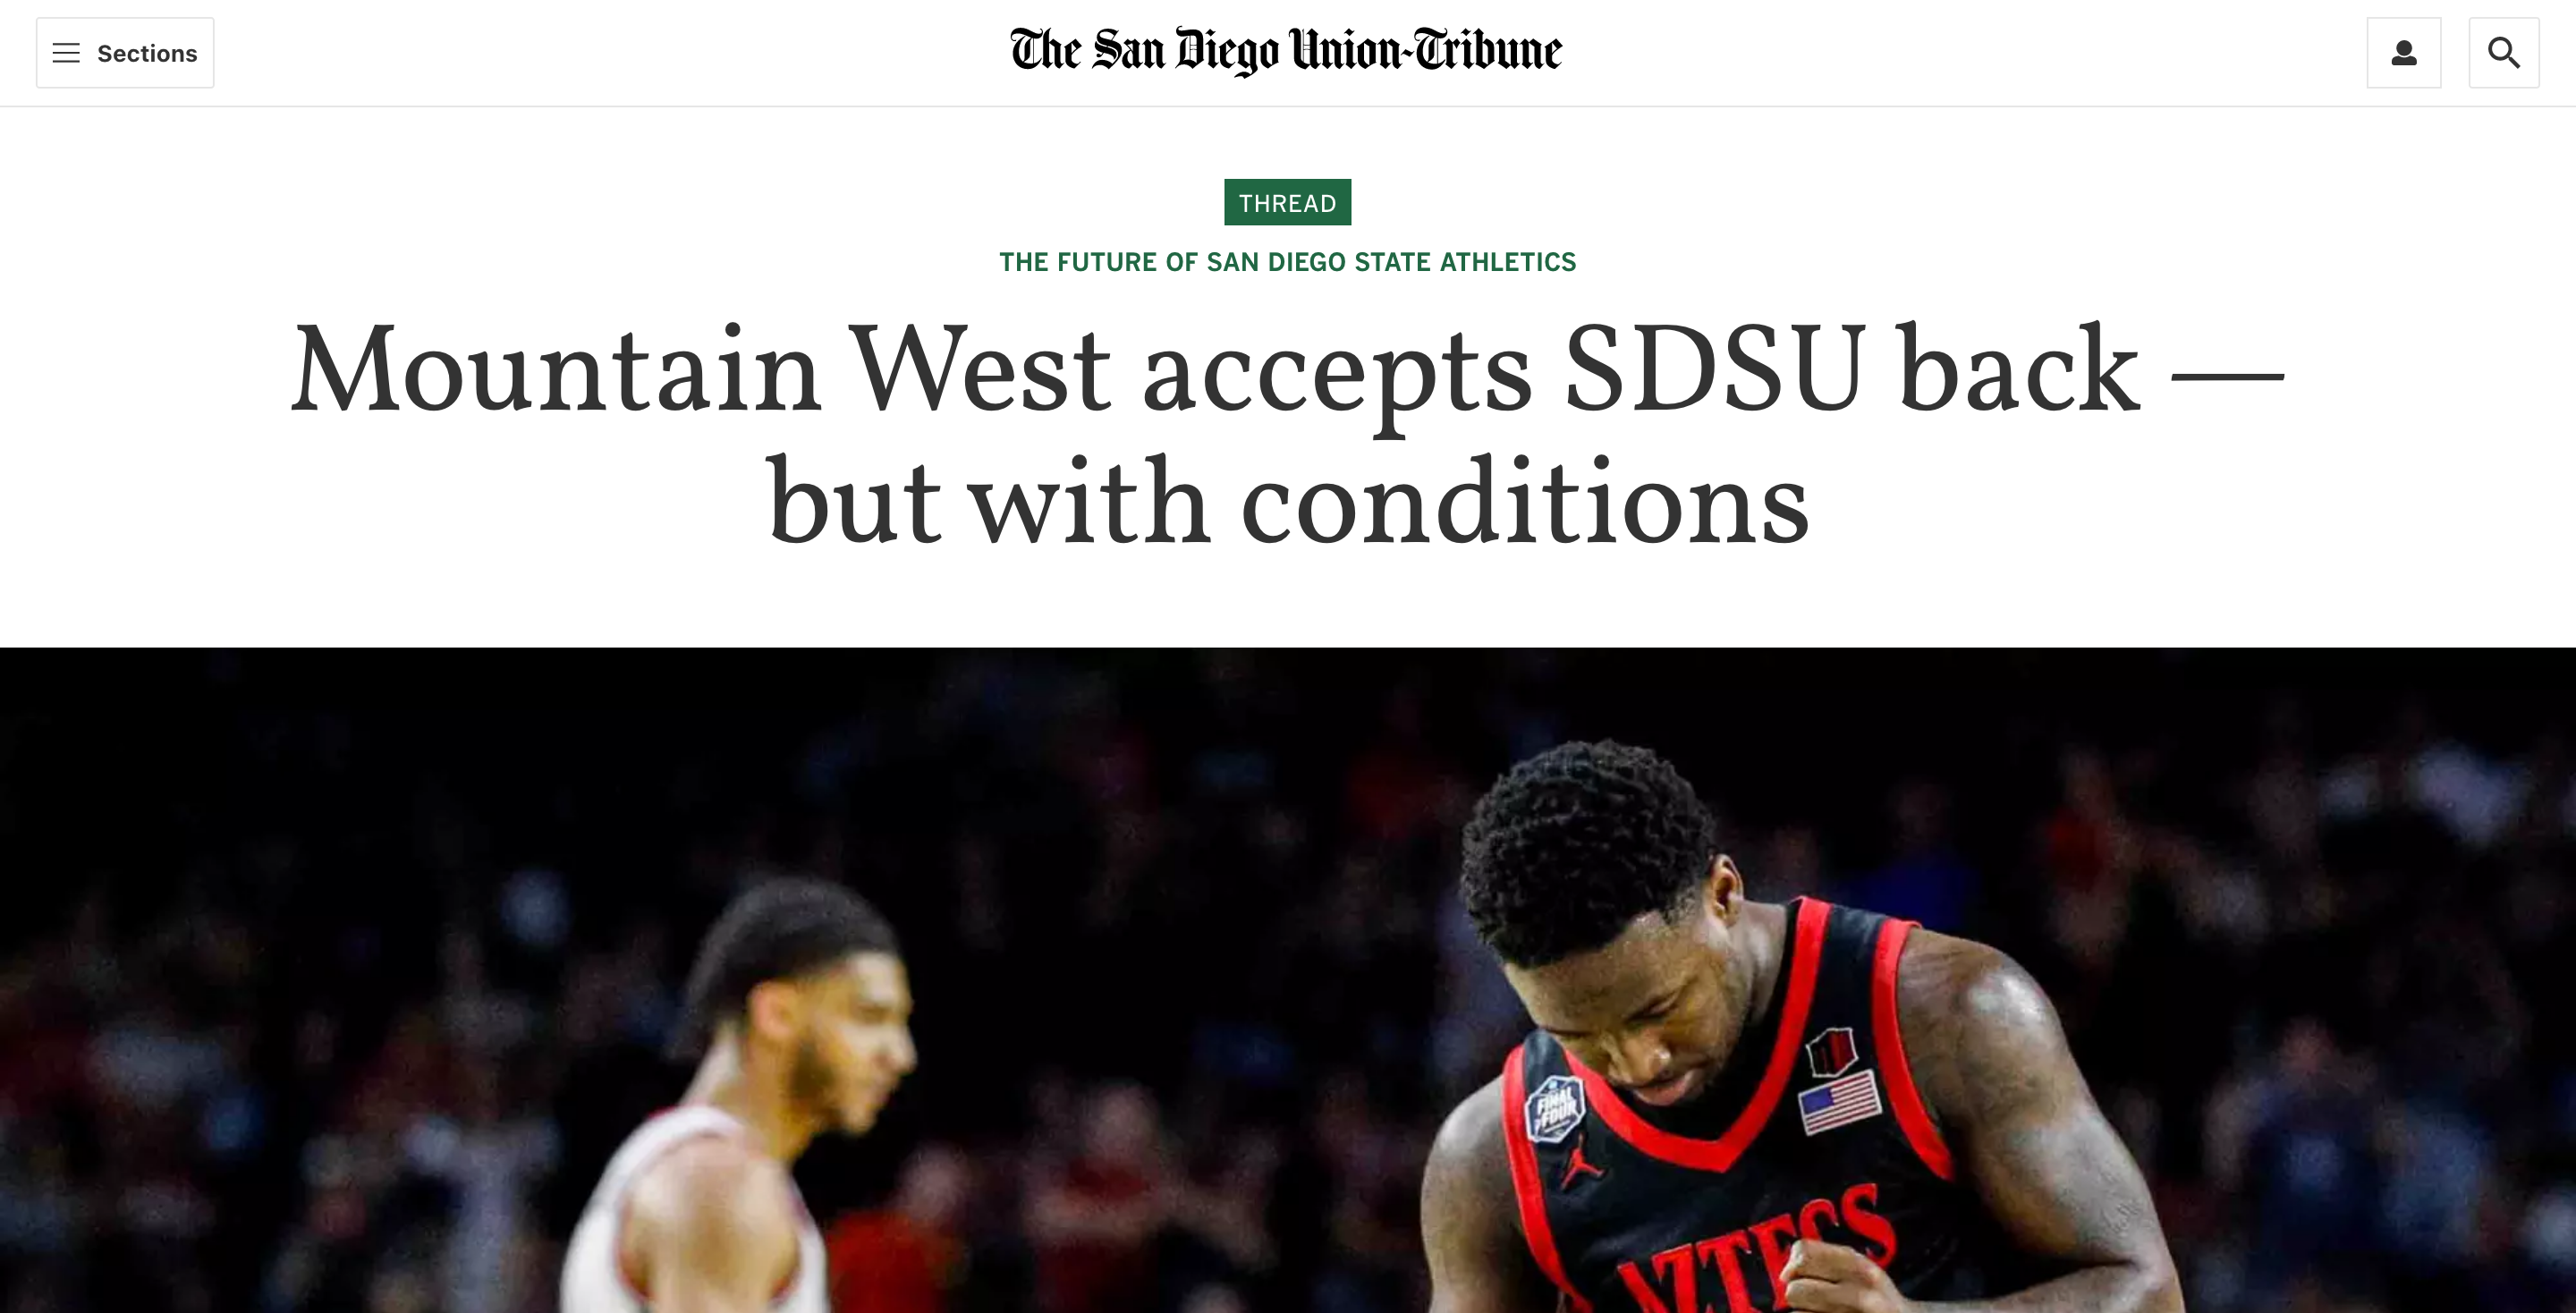 A screenshot of the San Diego Union-Tribune website, showing an article page with the headline ‘Mountain West accepts SDSU back — but with conditions.’ Above the headline is a thread badge linking to the thread guide page.